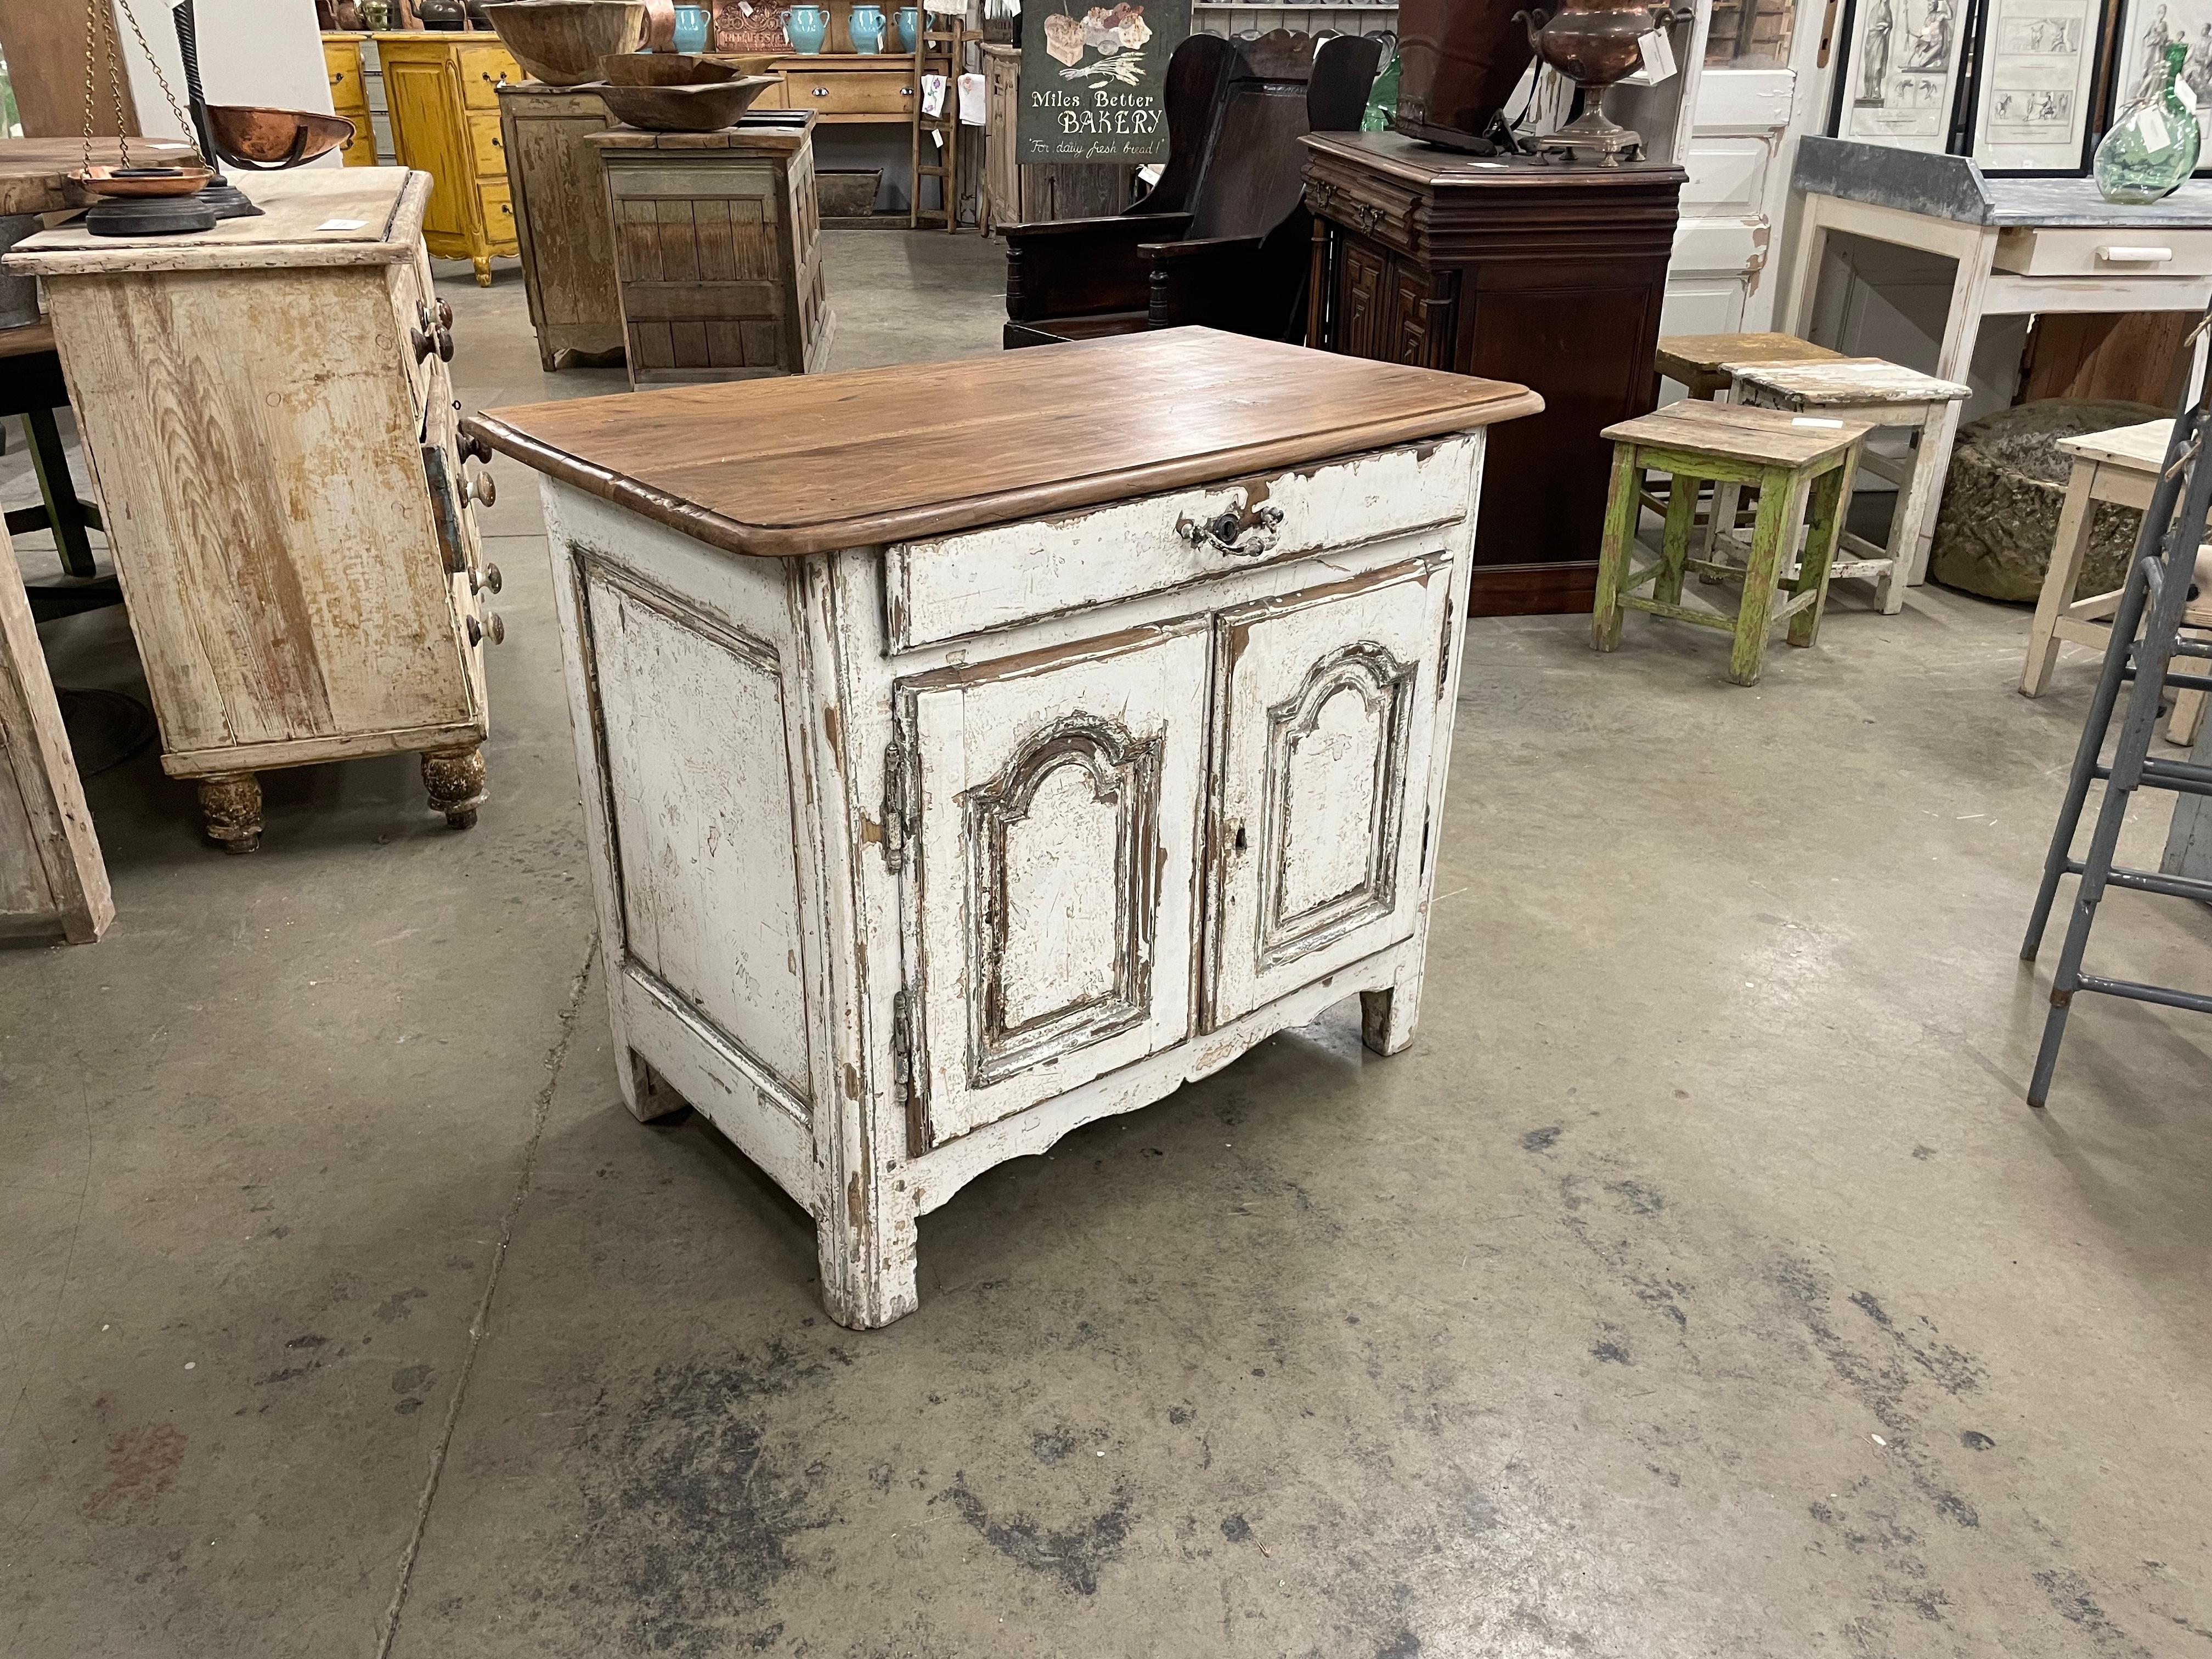 Antique French Provincial chunky oak cabinet or commode with its beautiful old hardware. It is dovetailed and peg jointed. The doors have deep recessed panels held in place with their original hinges. The cabinet has simple stile legs with a simply